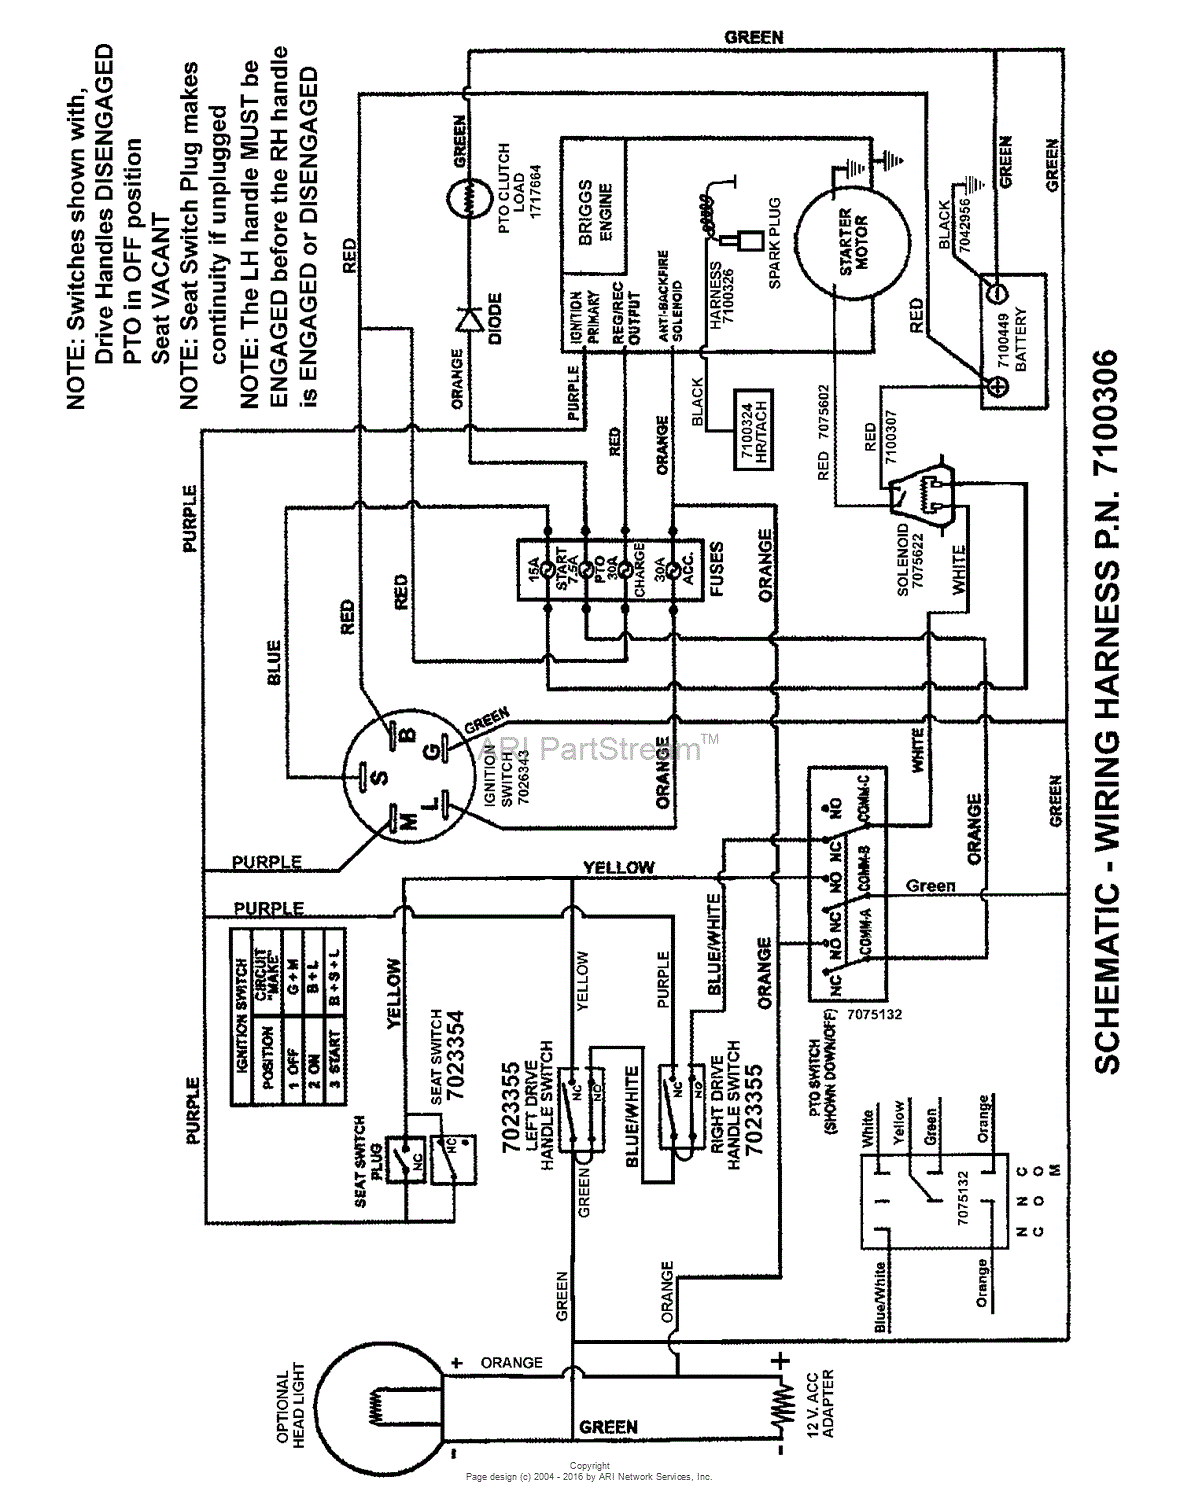 6 Prong Briggs Ignition Switch Wiring Diagram from az417944.vo.msecnd.net